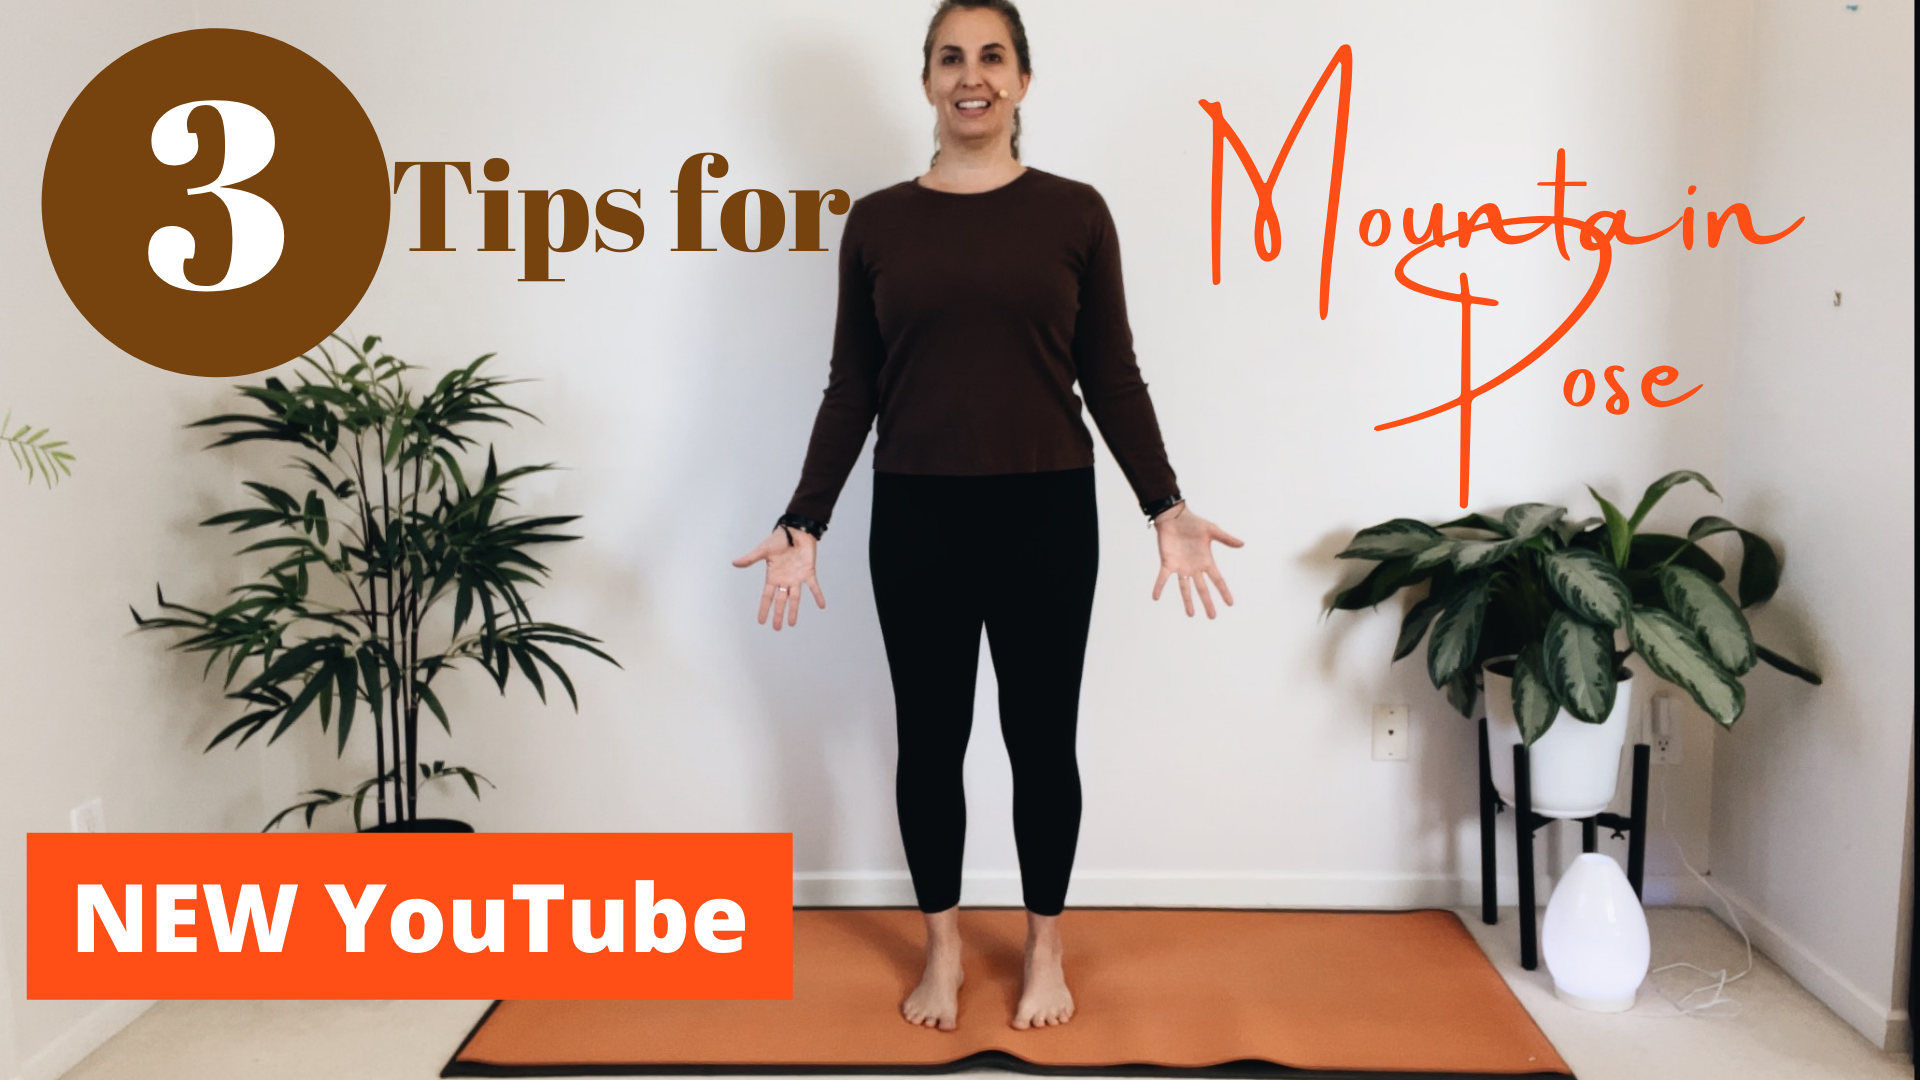 YouTube: 3 Tips for Mountain Pose | Yoga with Laura